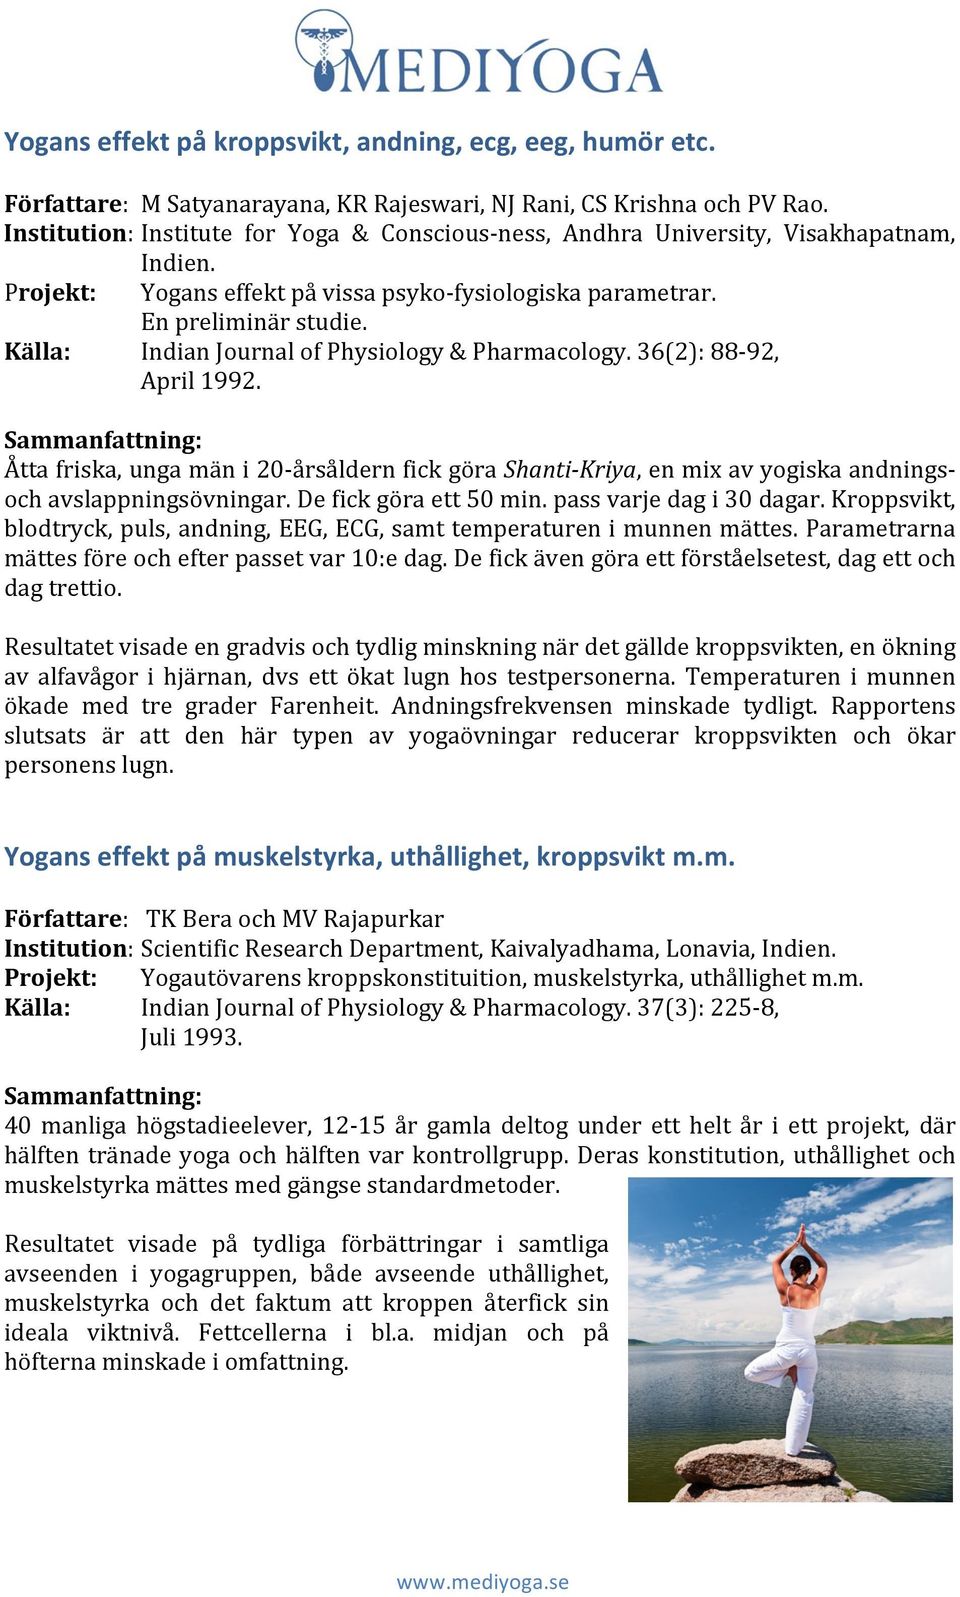 Källa: Indian Journal of Physiology & Pharmacology. 36(2): 88-92, April 1992.